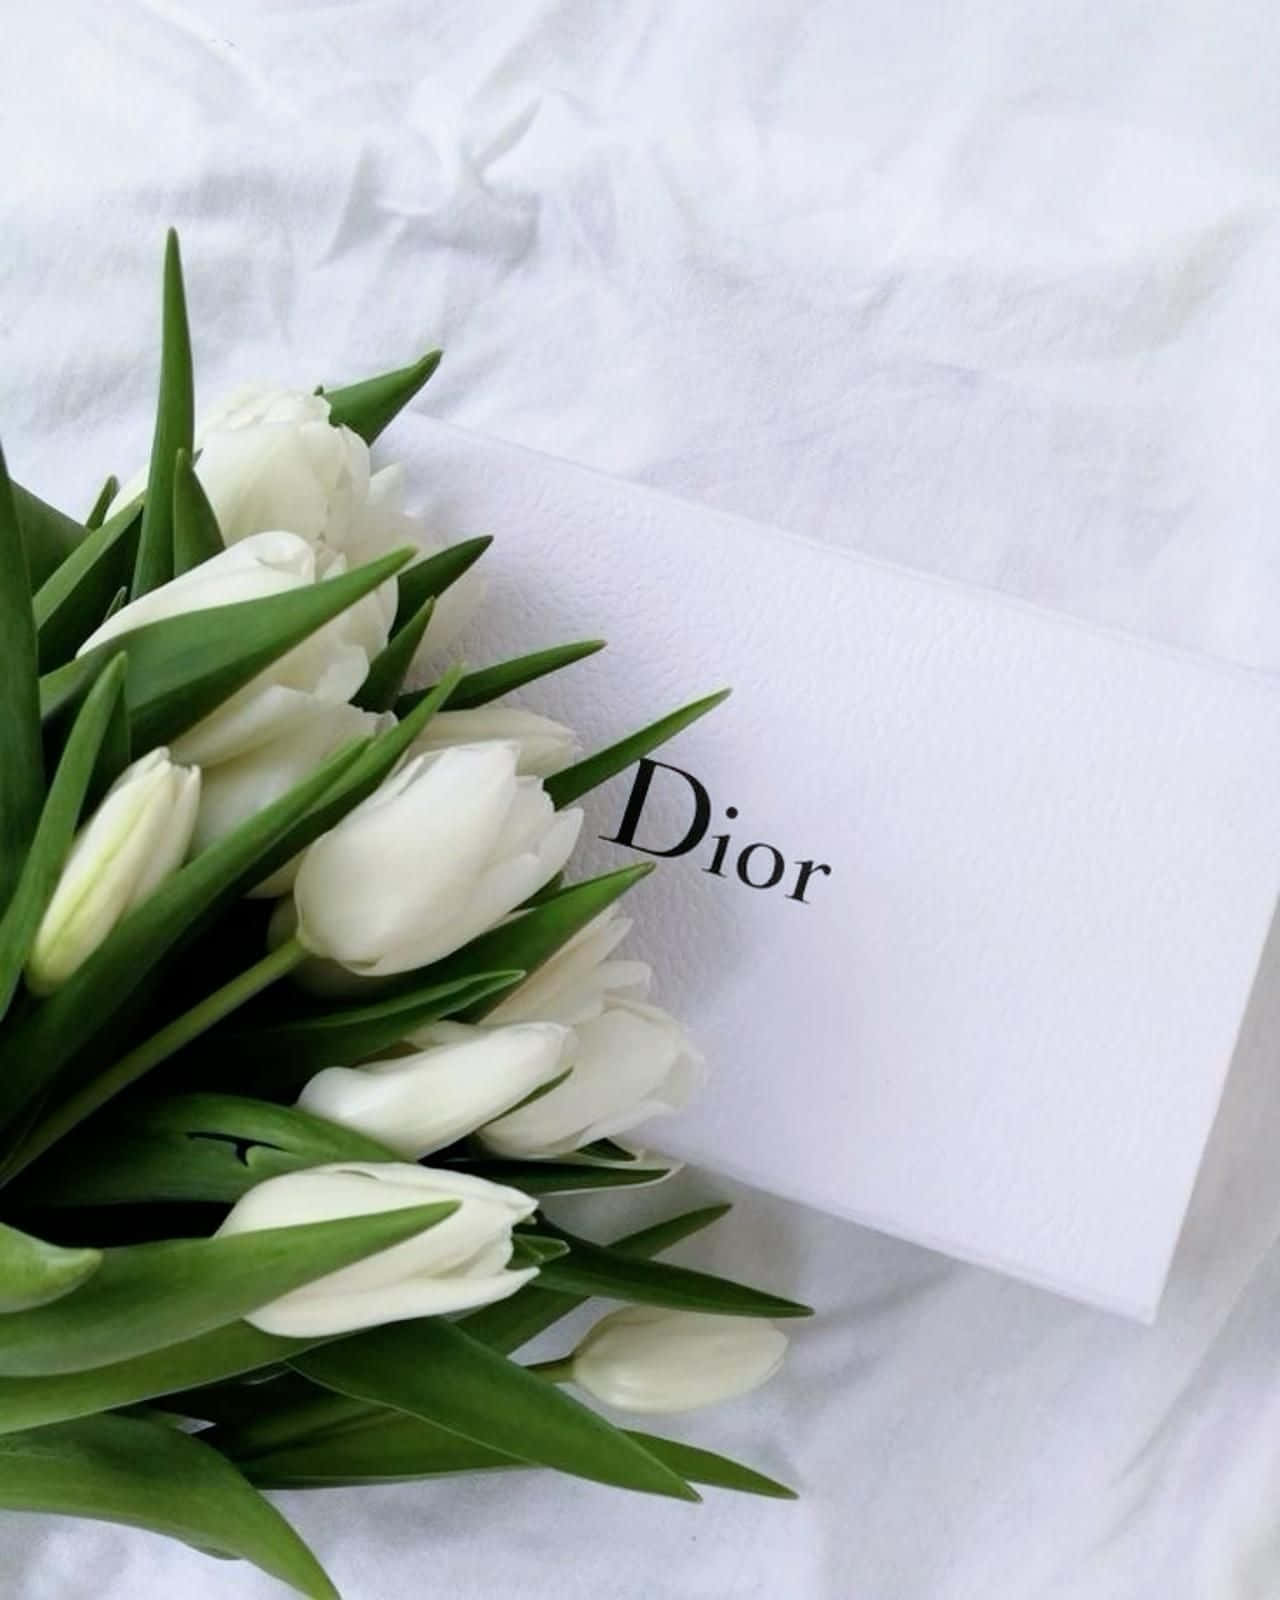 Dior Branded Card With White Tulips Wallpaper